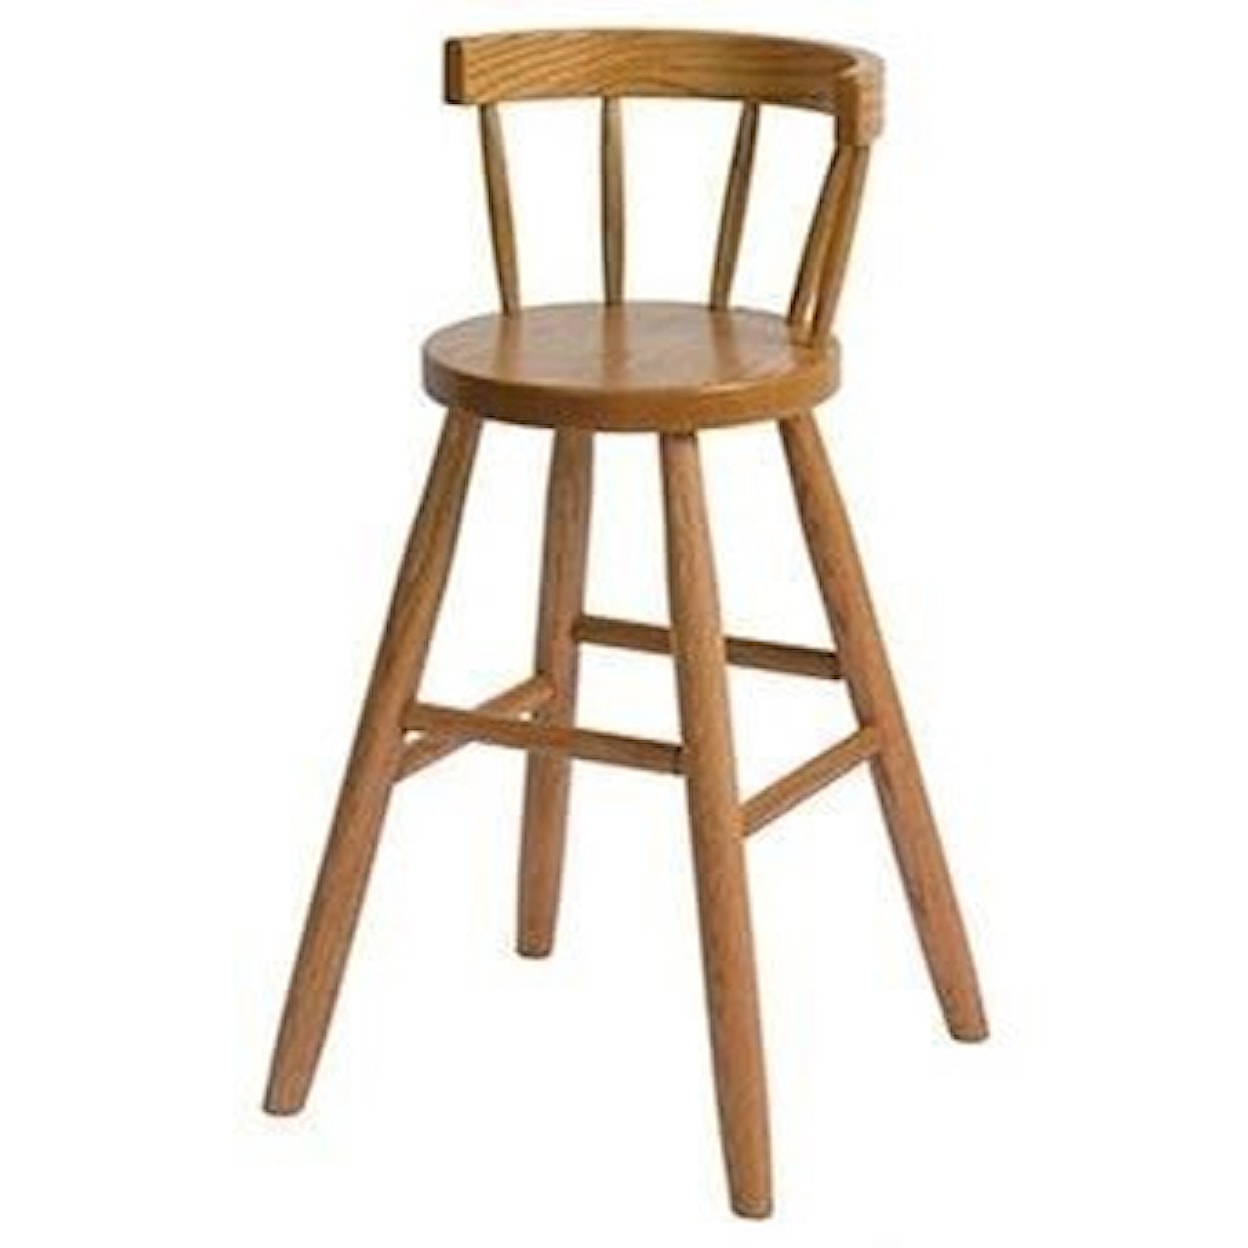 Horseshoe Bend Child Solid Wood Regular Child's Chair